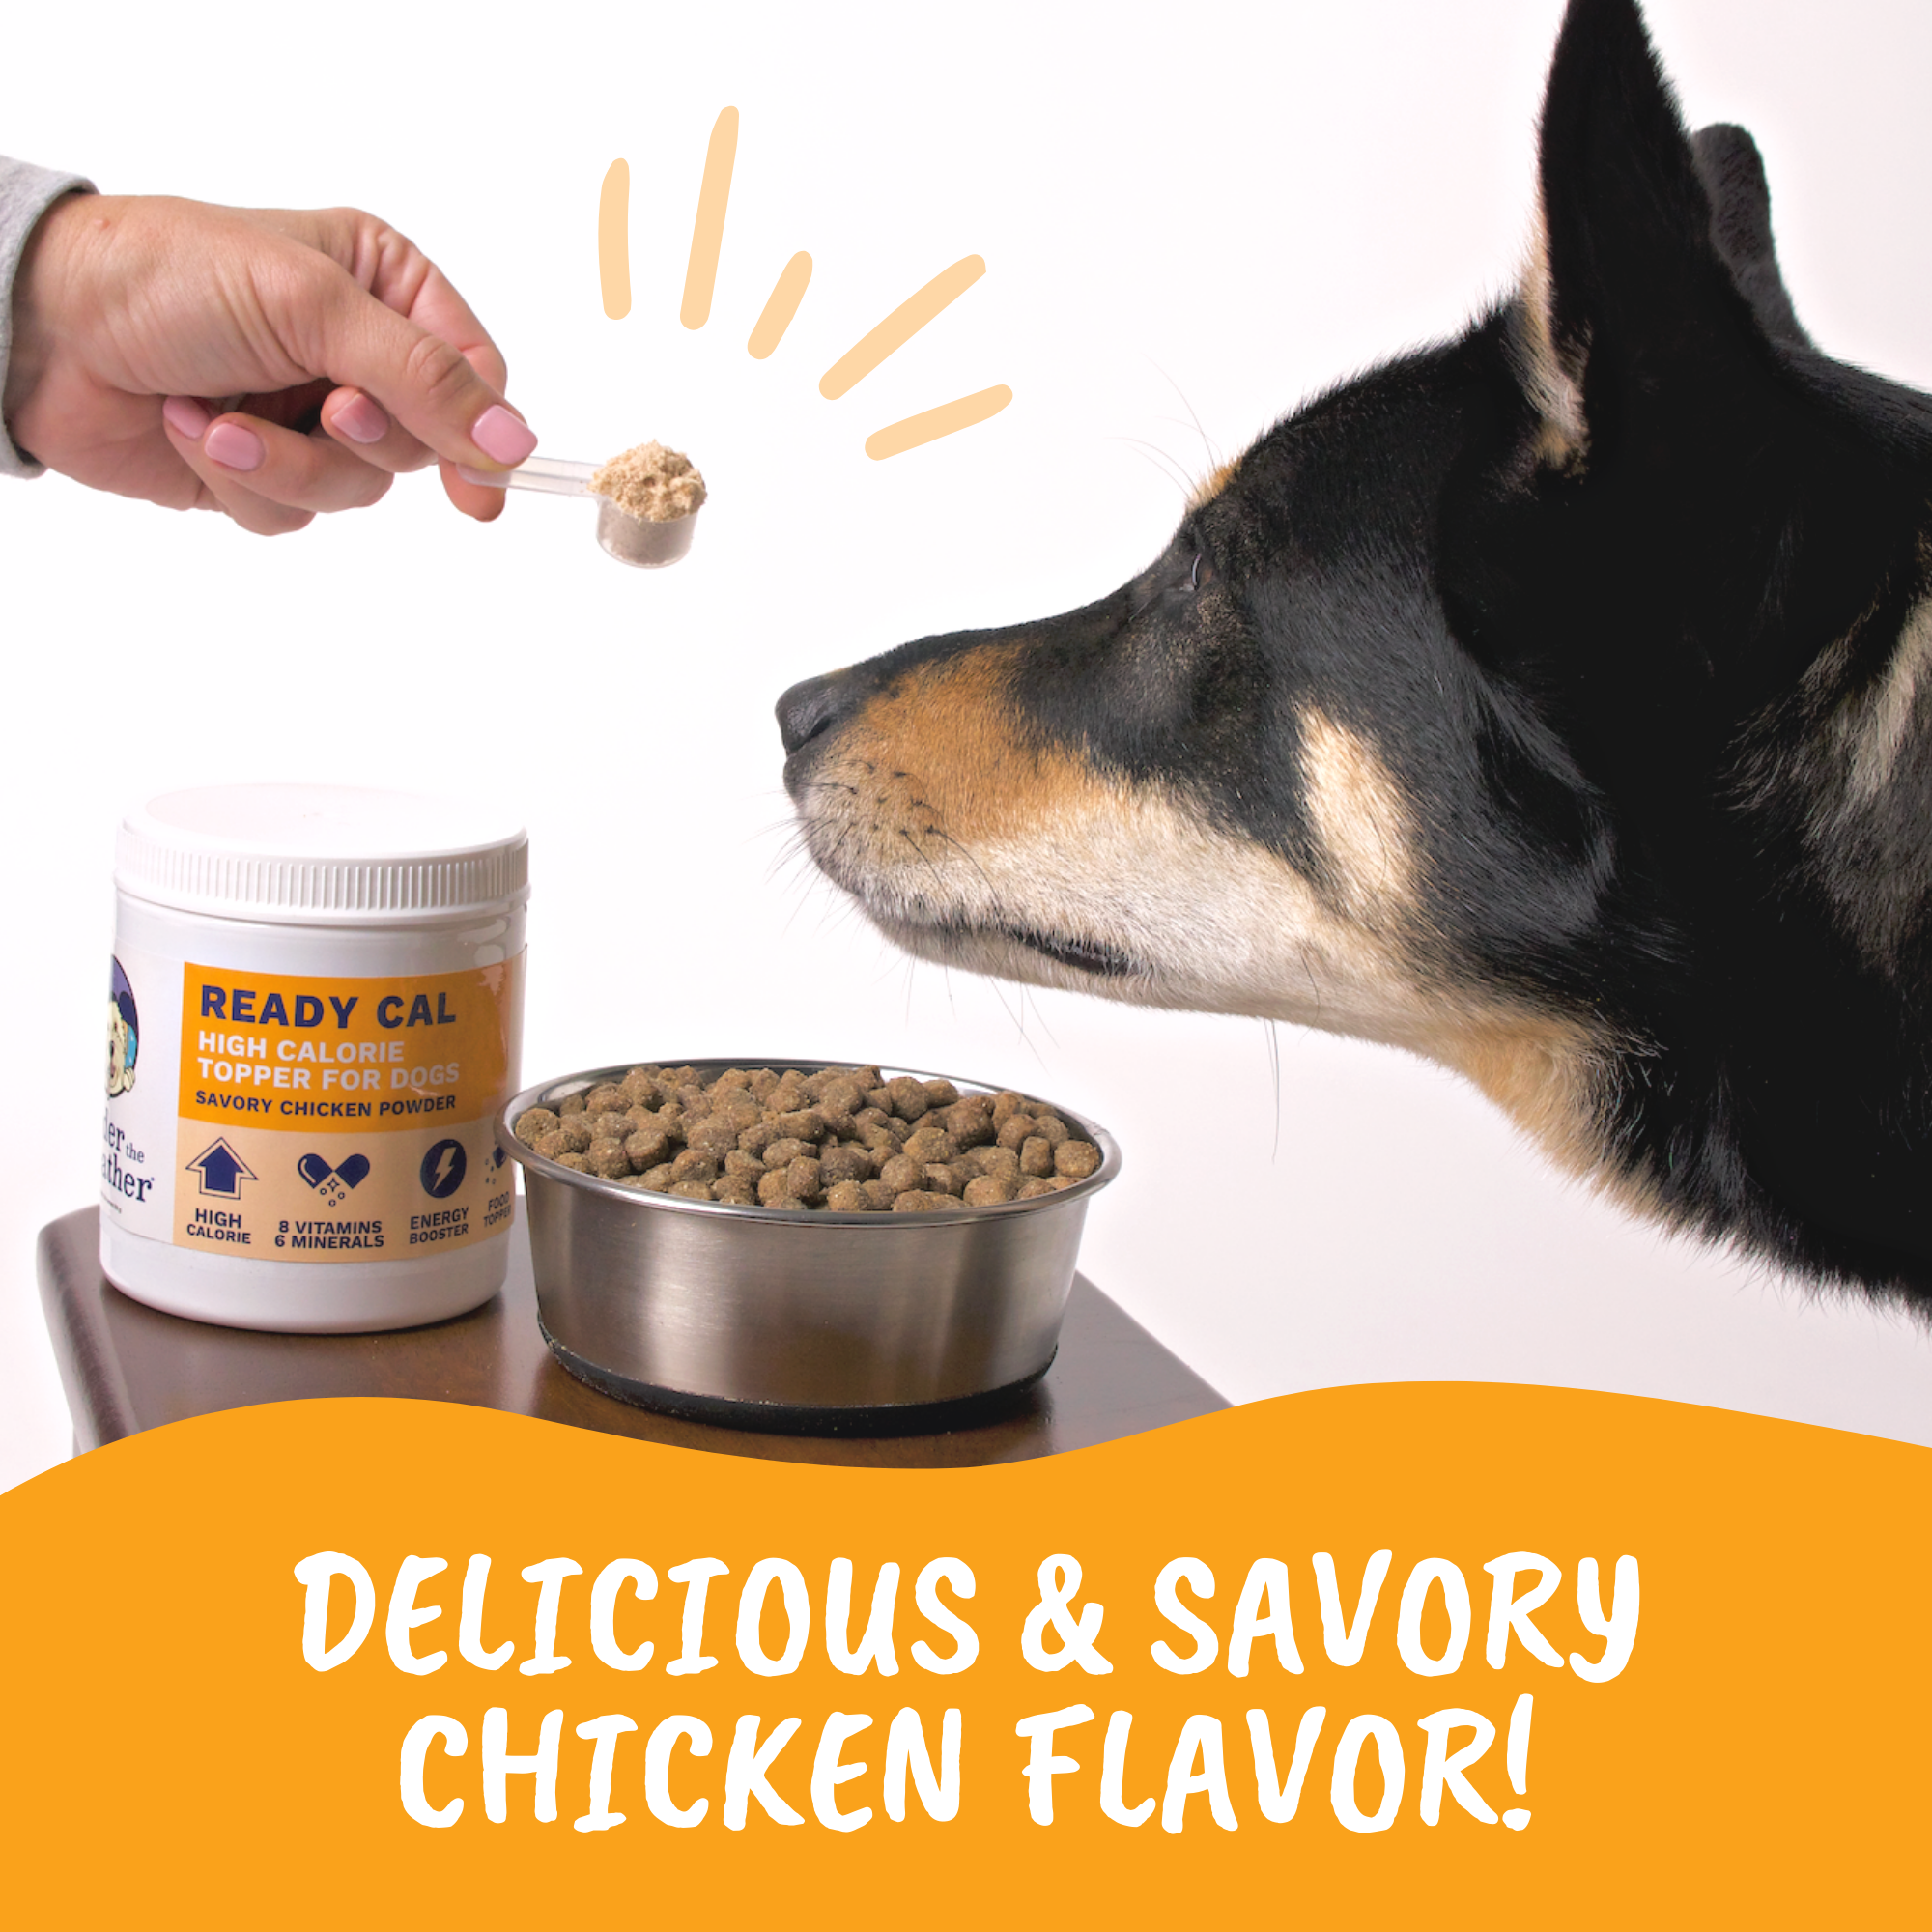 Ready Cal High Calorie Powder for Dogs